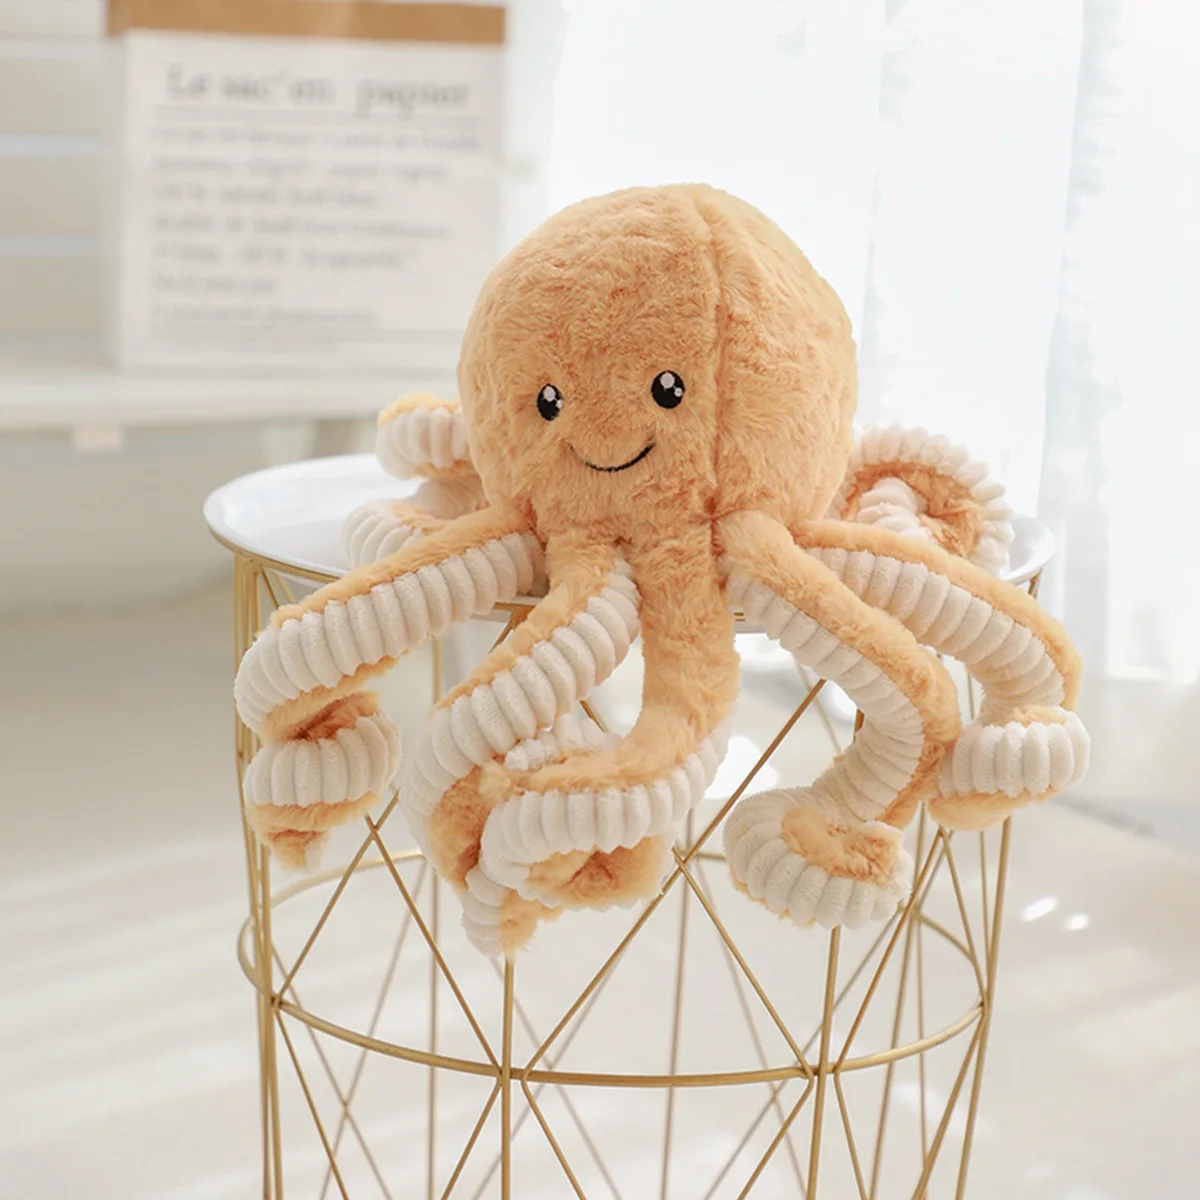 Cute Octopus Plush Stuffed Toys Lovely Soft Home Accessories Pillow Sea Creative Animal Doll Children 40 Cute Octopus Plush Stuffed Toys Lovely Soft Home Accessories Pillow Sea Creative